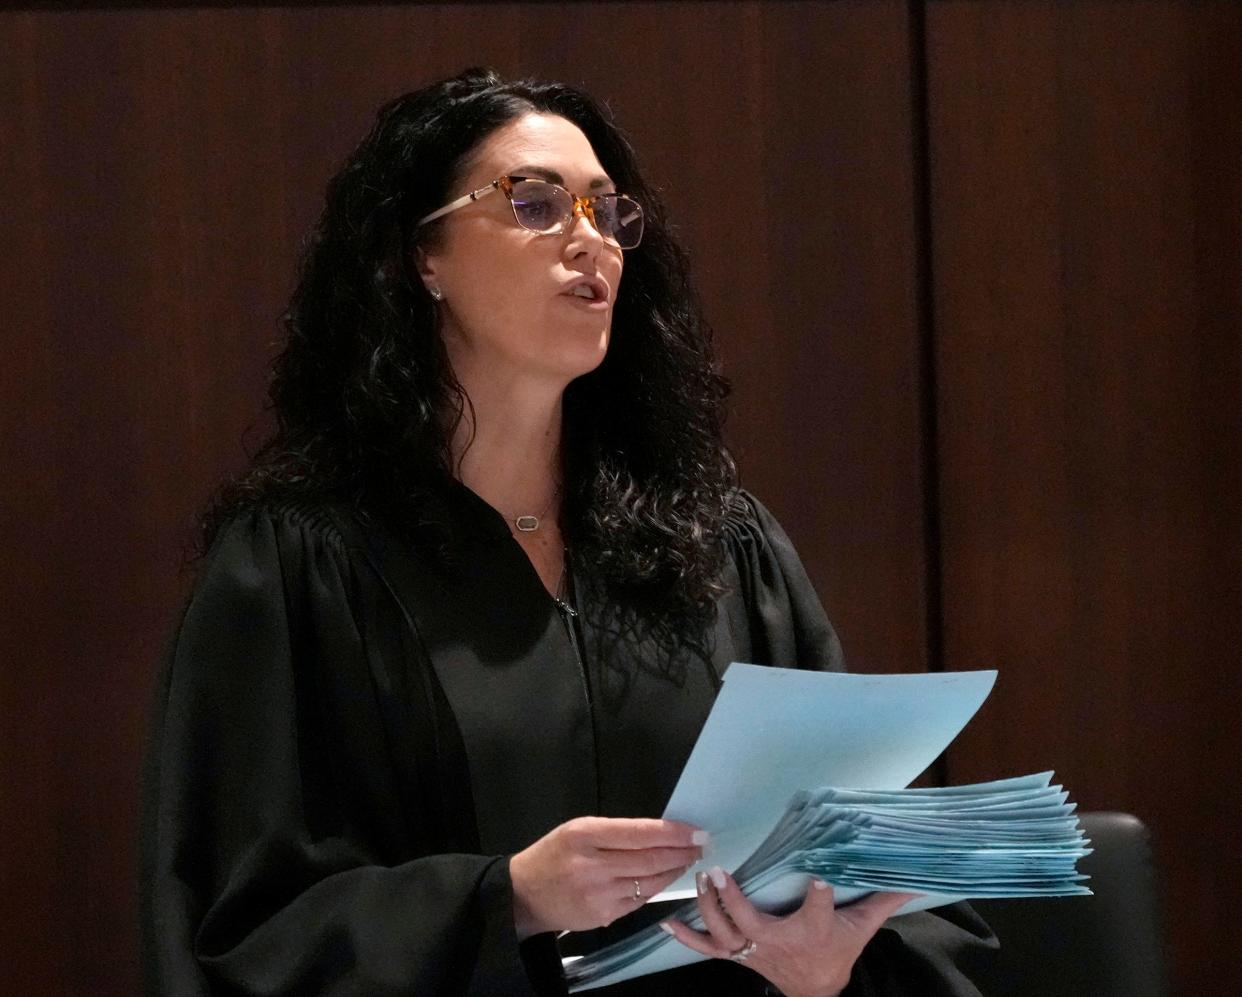 Waukesha County Circuit Court Judge Jennifer Dorow reads the verdicts for all 76 counts during the Darrell Brooks trial on Wednesday.